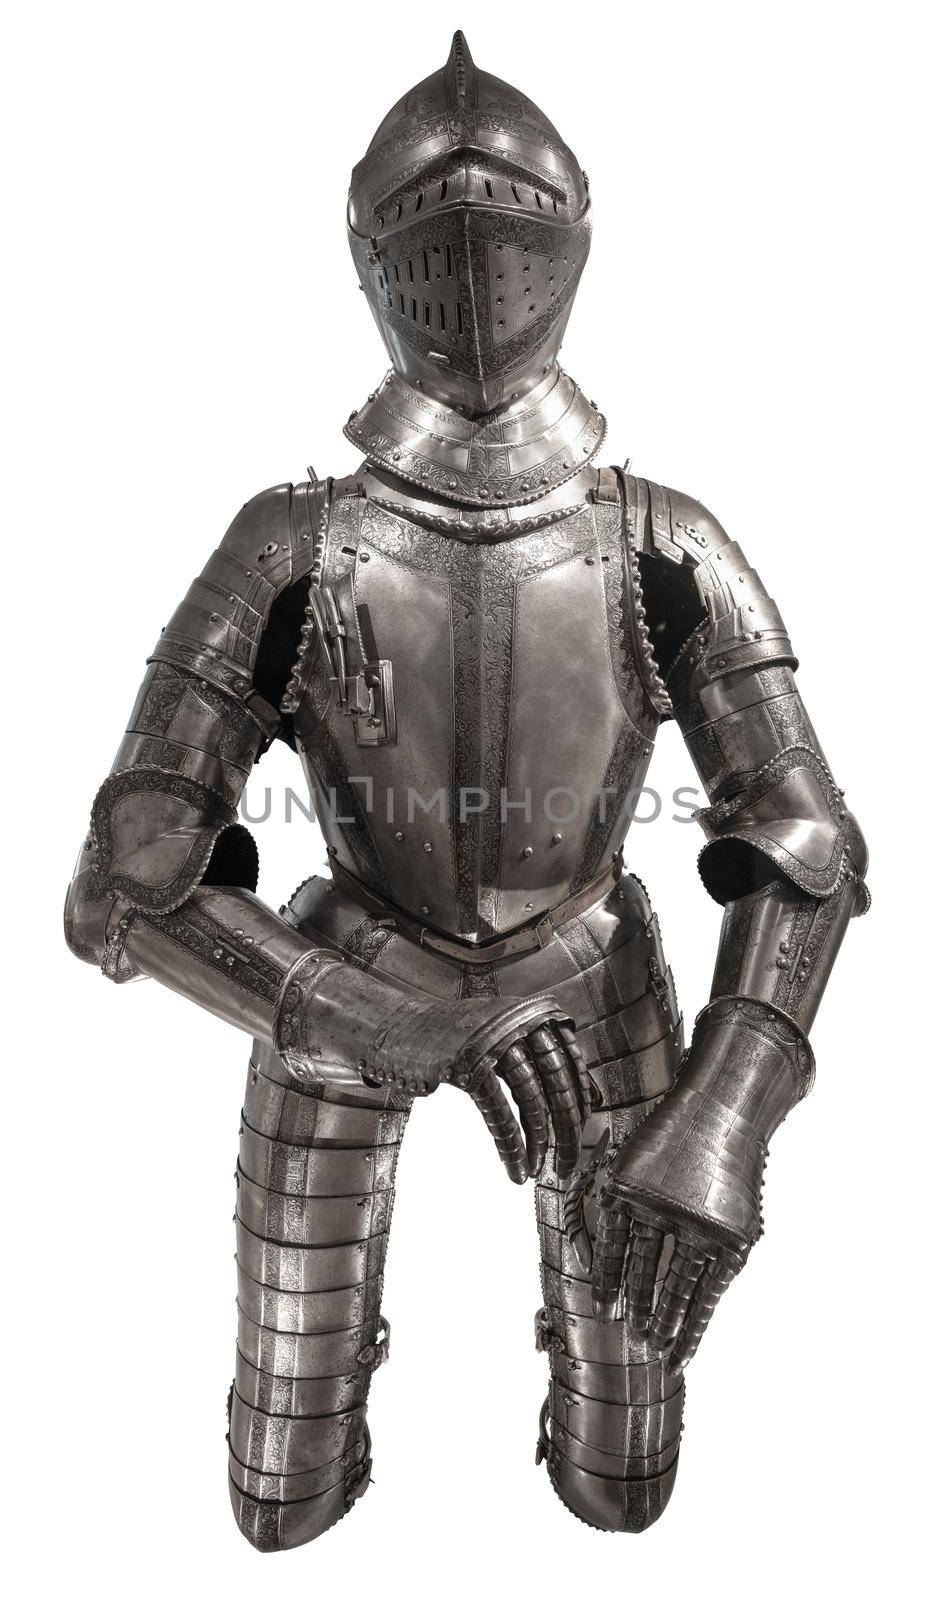 A Medieval Suit Of Armour, Isolated On A White Background